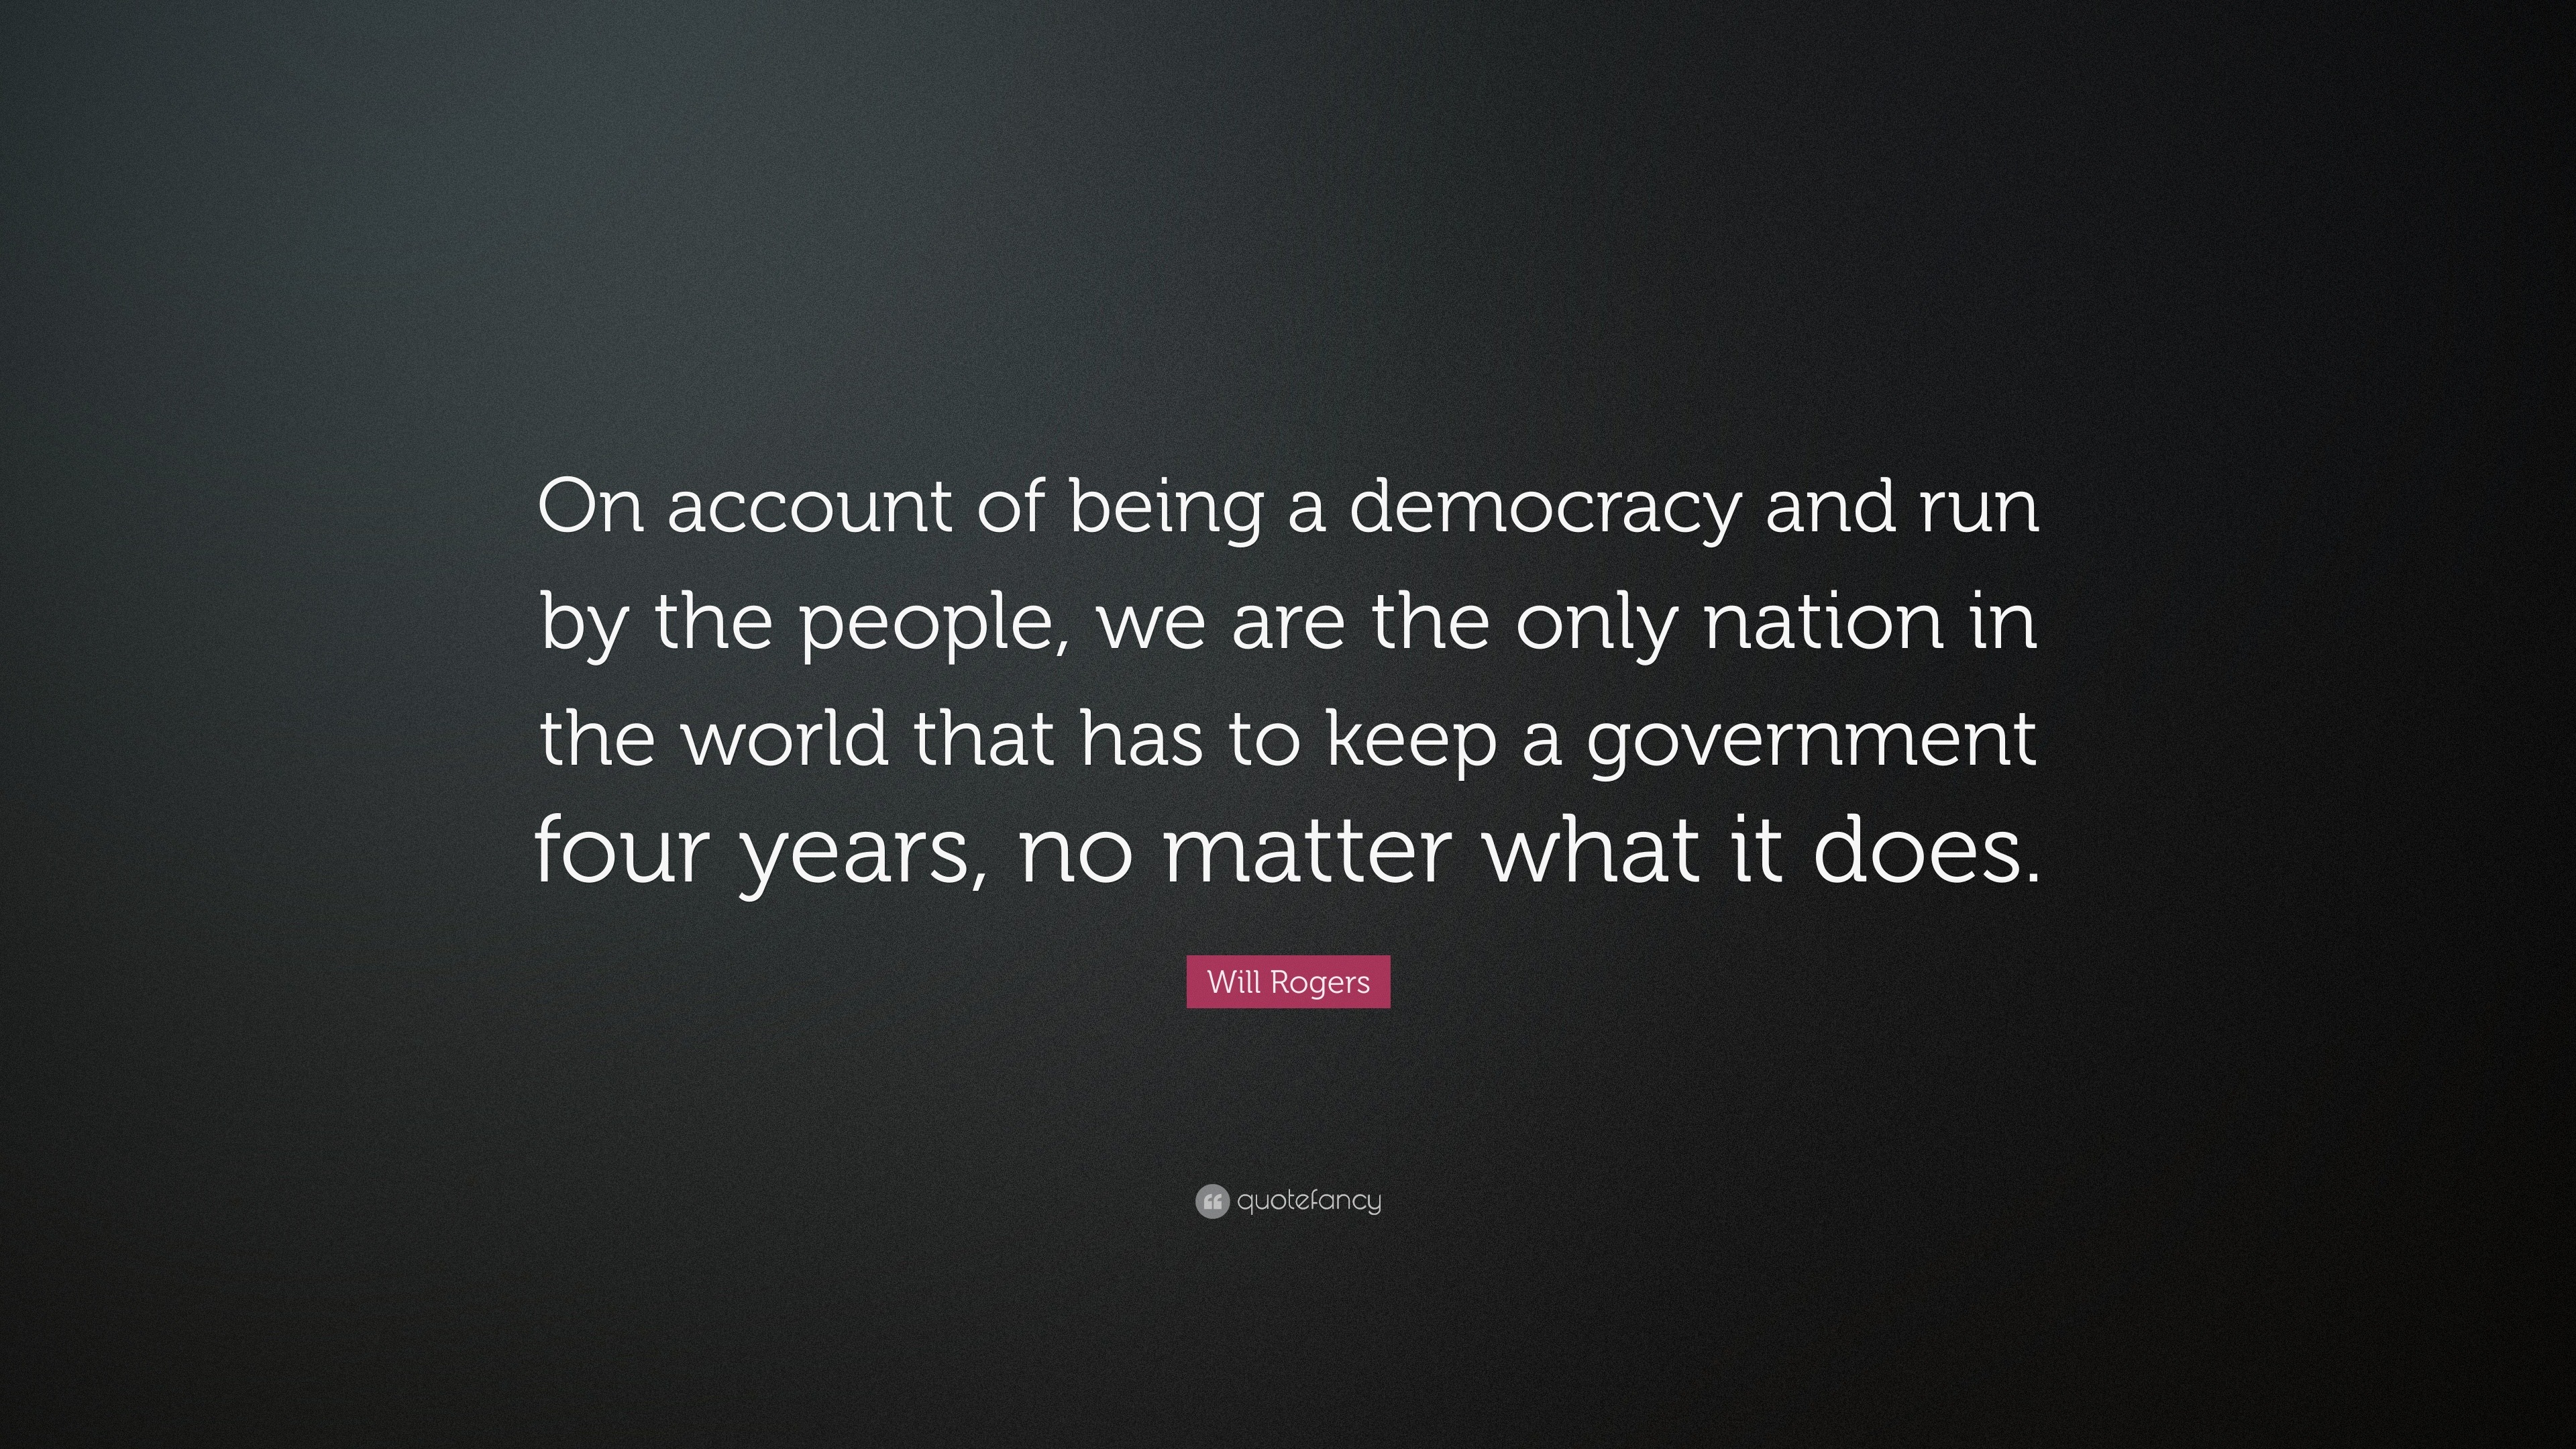 Will Rogers Quote: “On account of being a democracy and run by the people,  we are the only nation in the world that has to keep a government...”